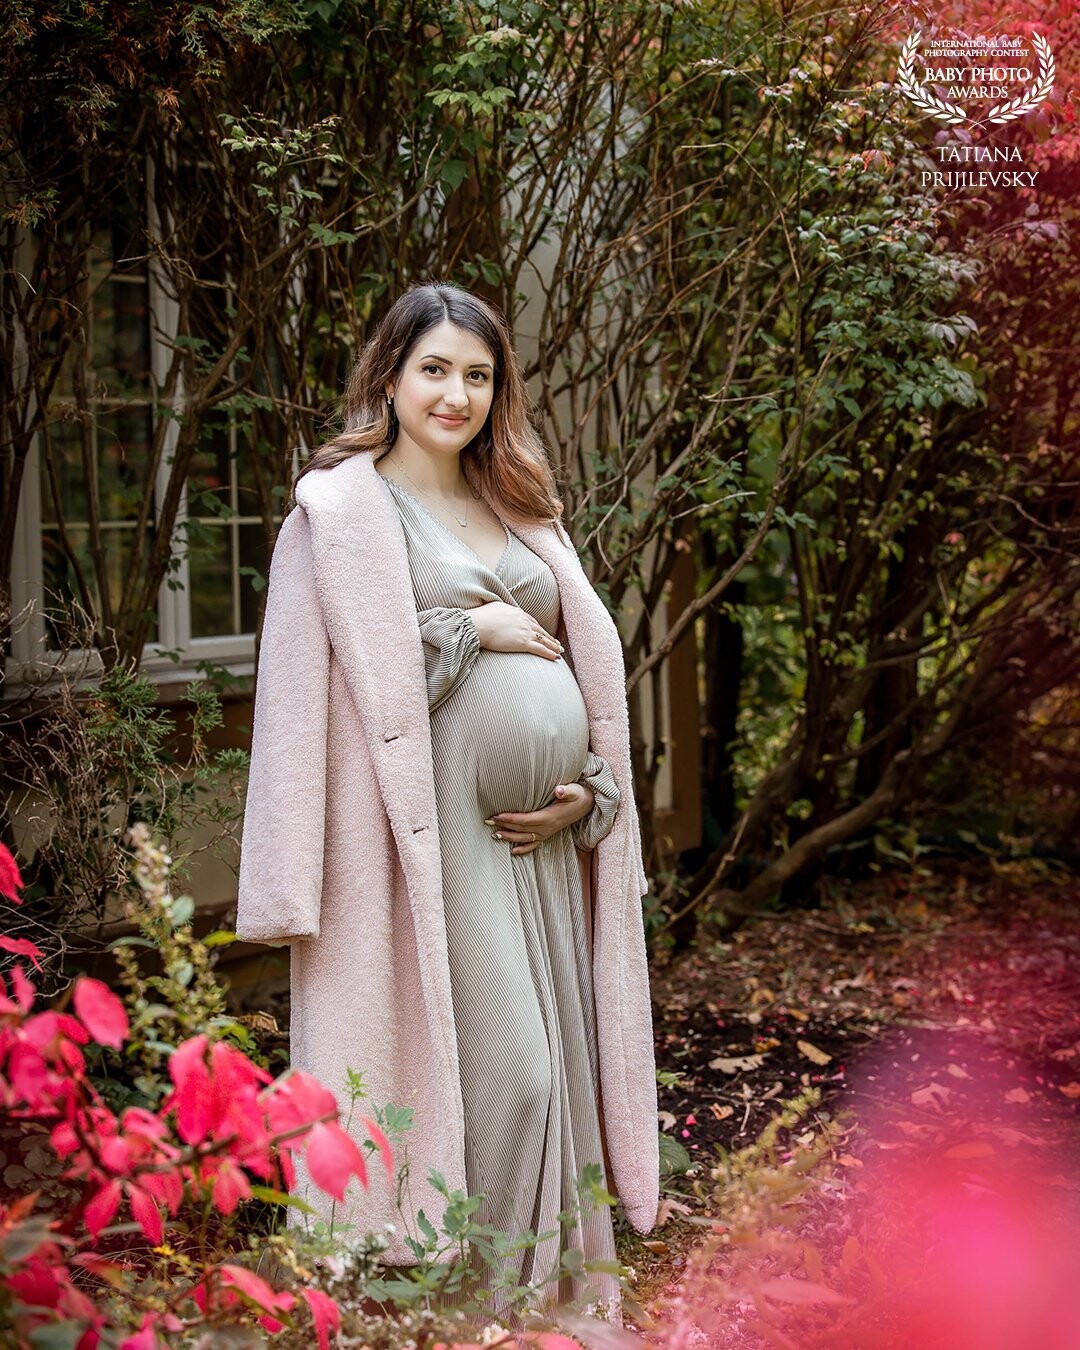 October… this month is special about taking outdoor photos. Beautiful mom to be for second time. Lovely mood and pastels treatment of automne colours.